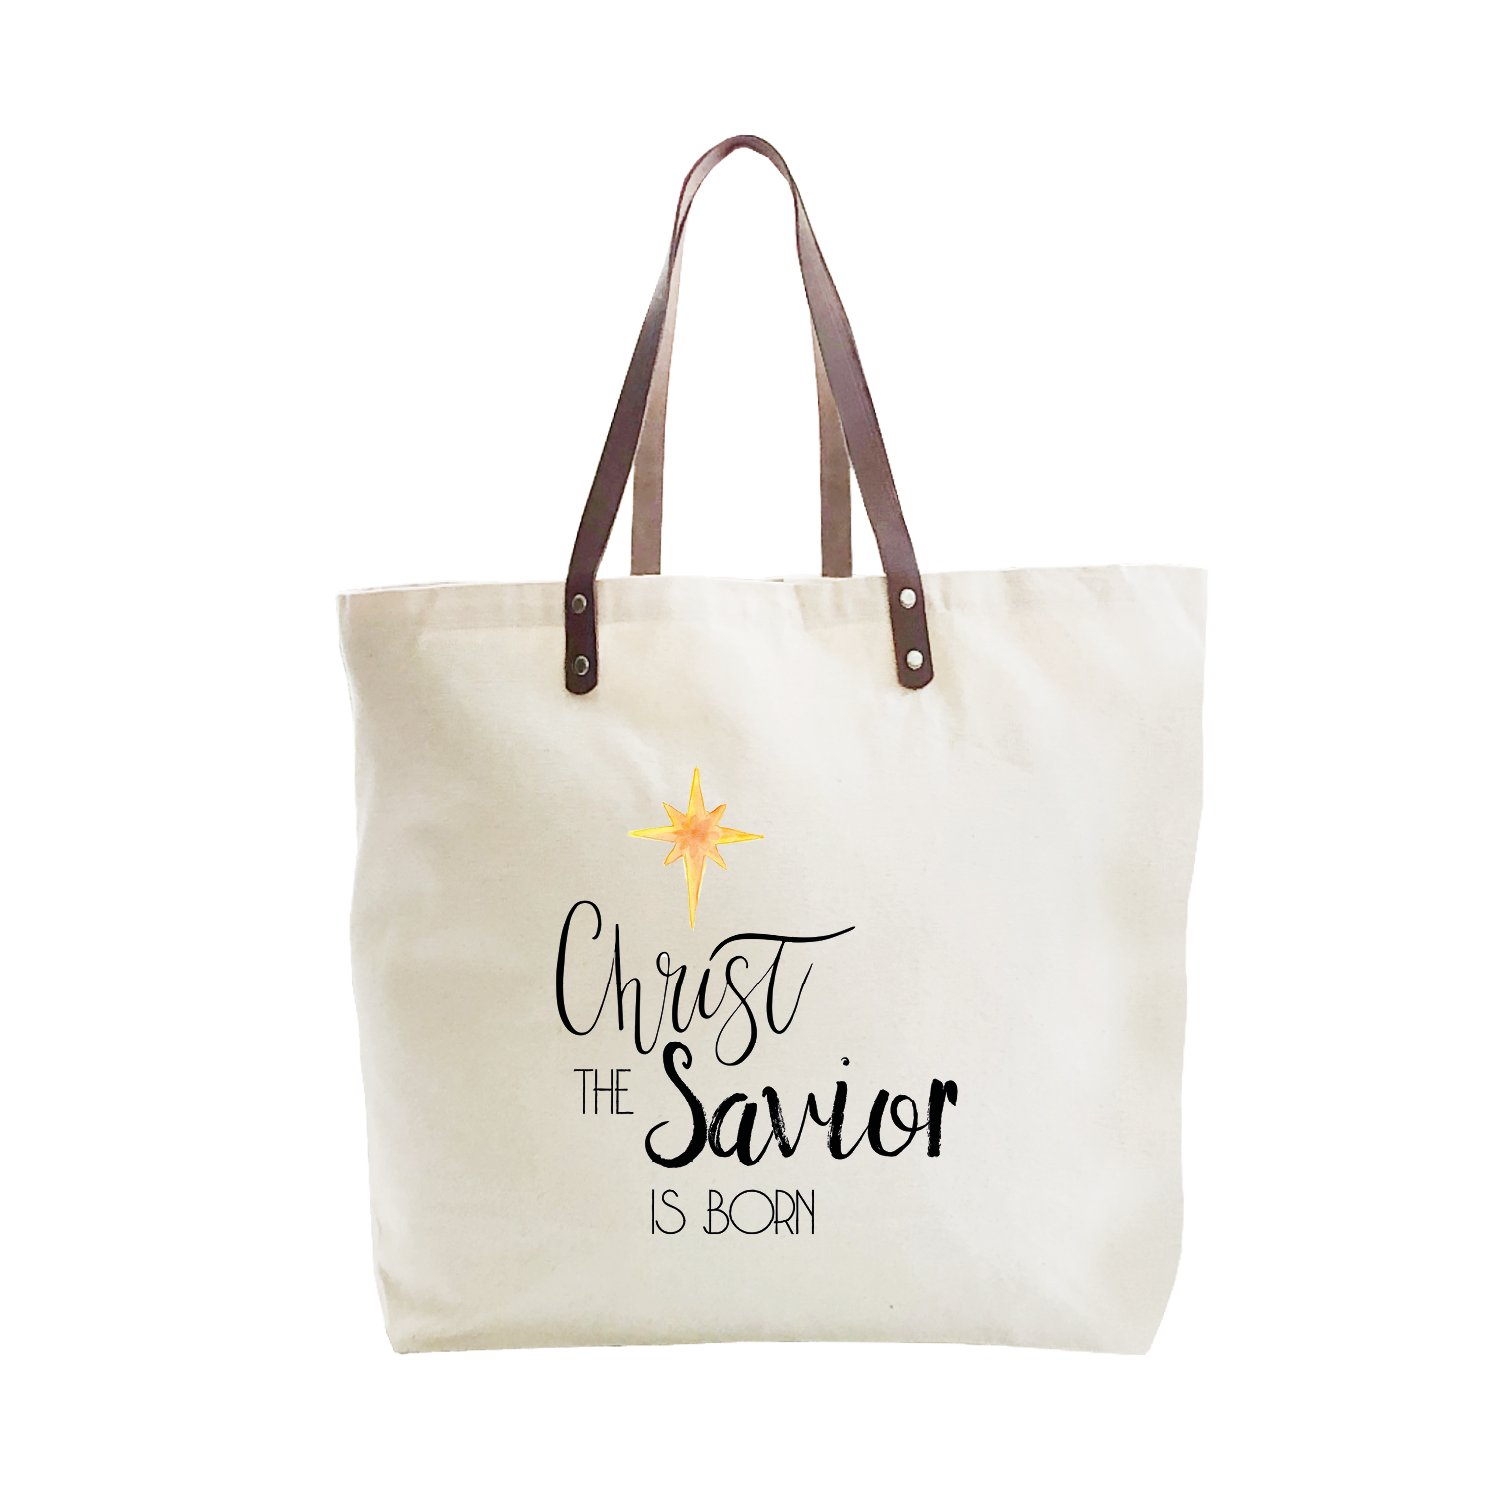 Christ is born large tote